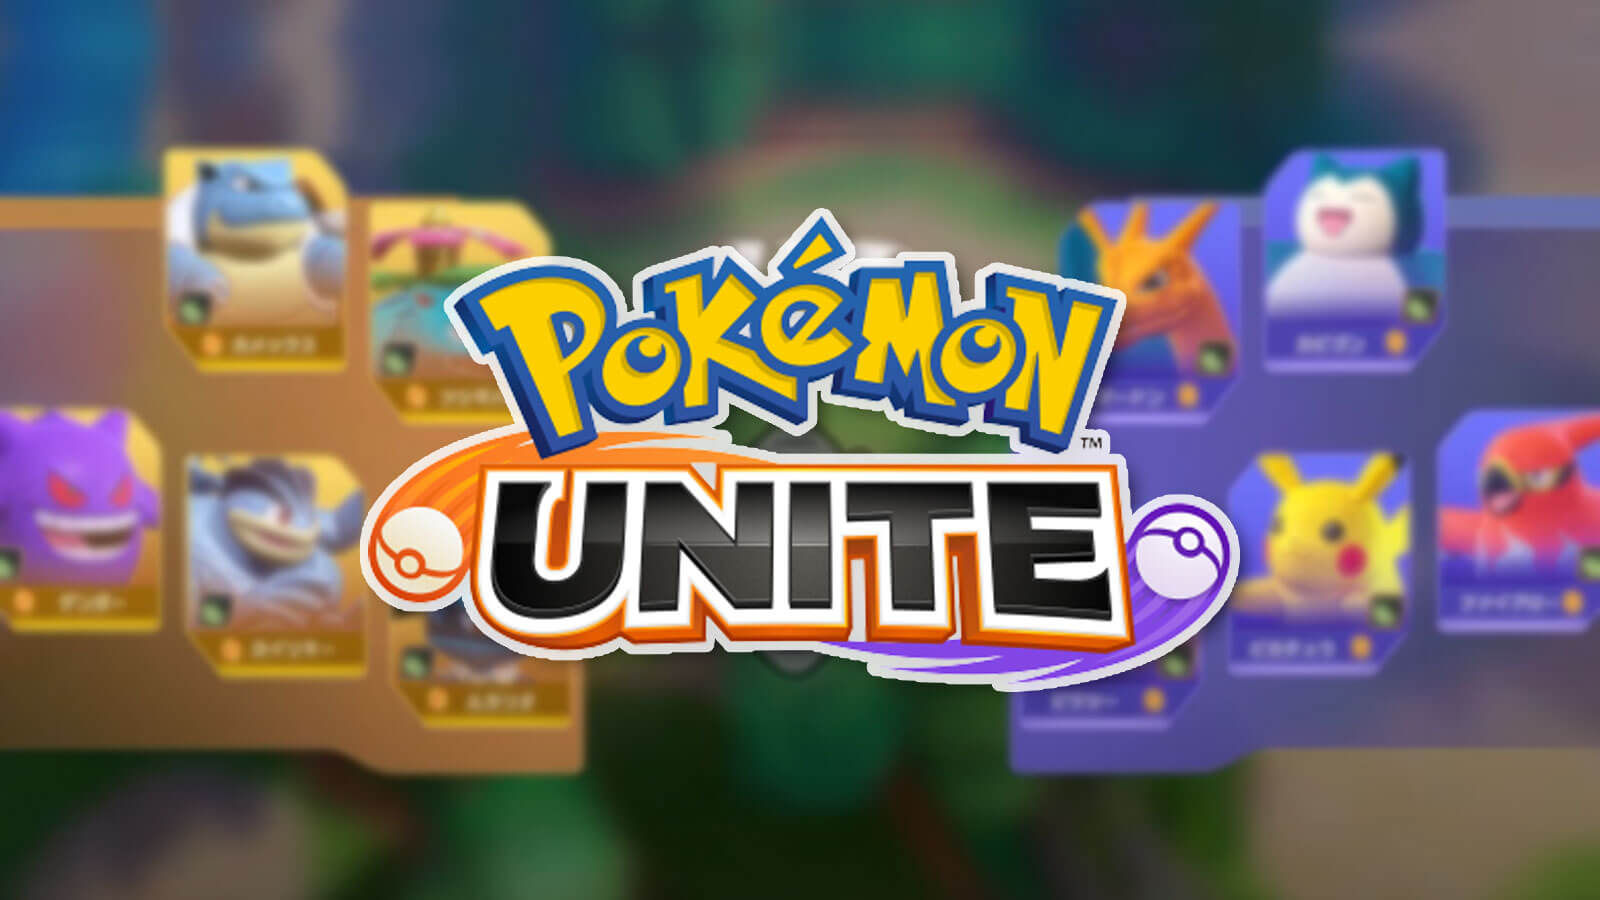 Major Updates in Pokémon Unite: Draft in Ranked Mode and New EX Licenses